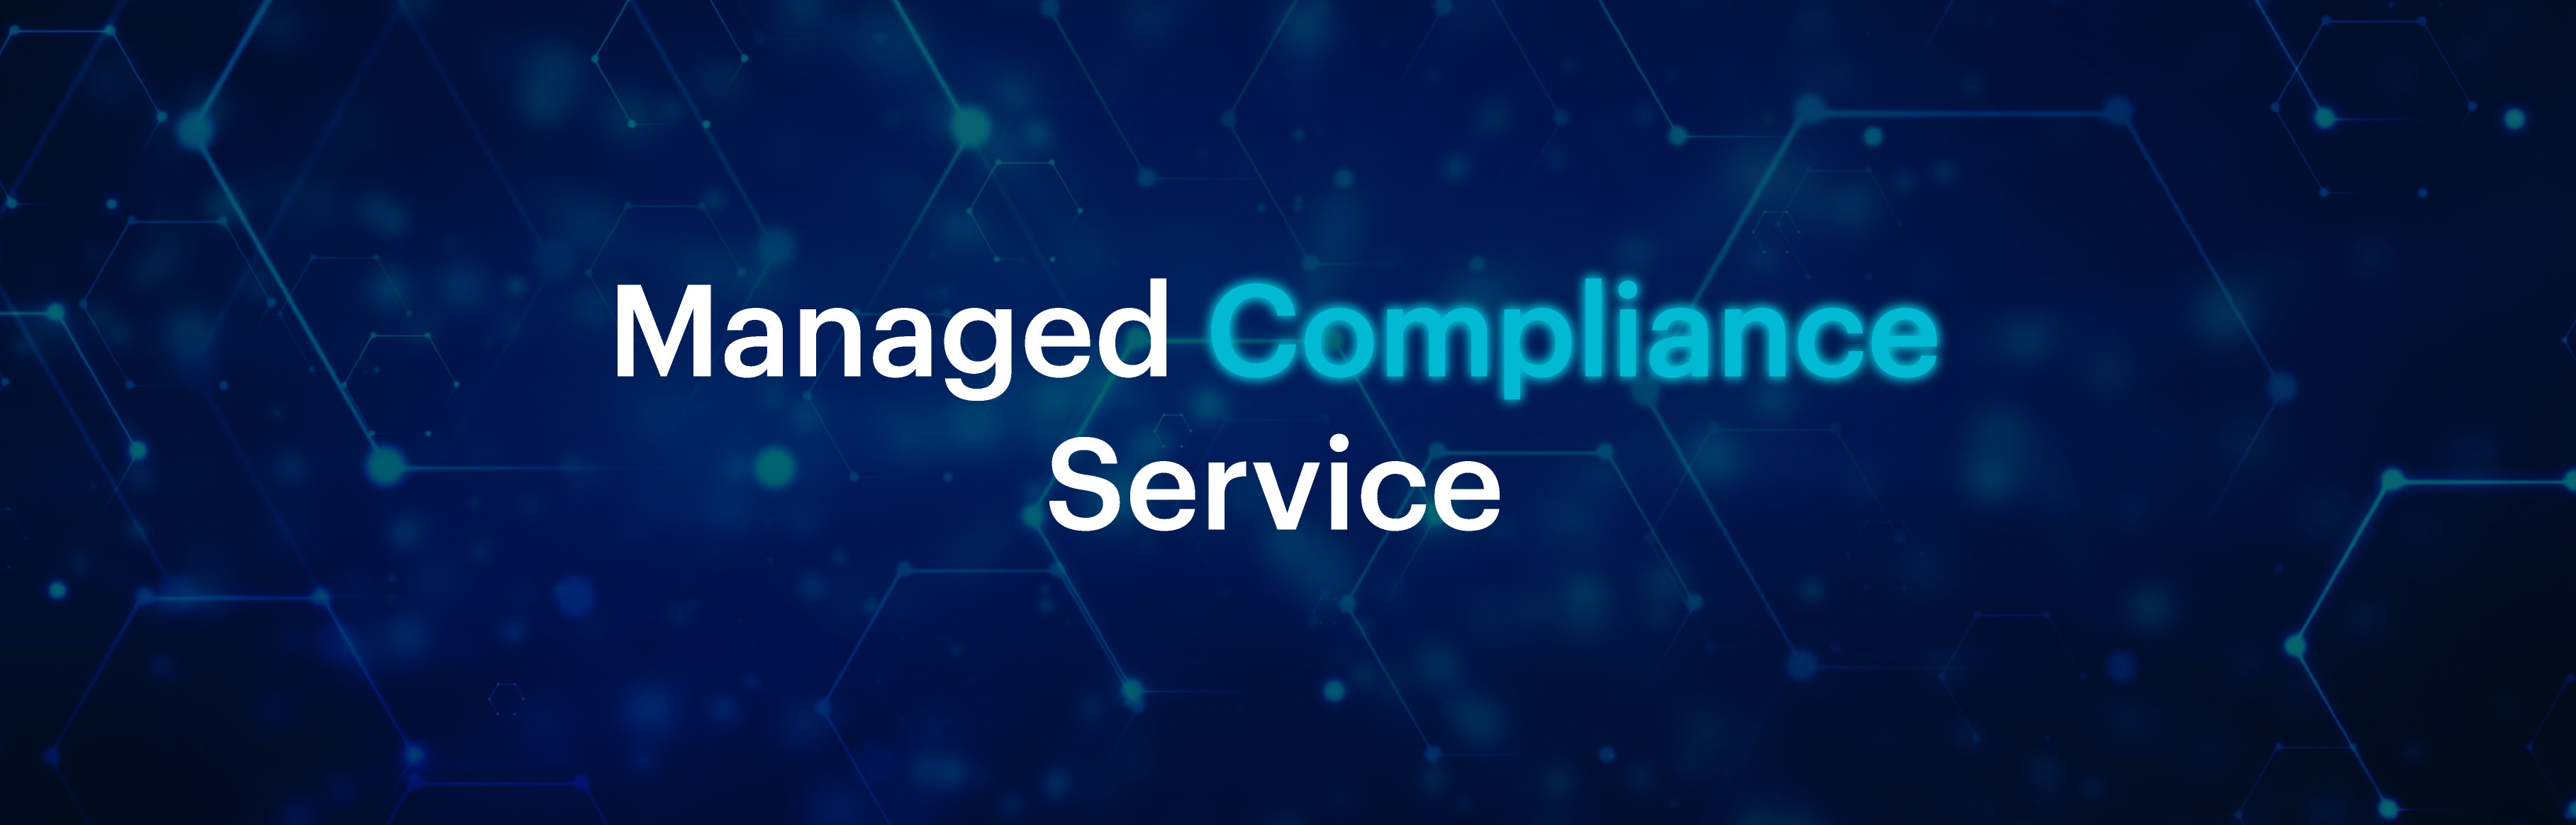 Managed Compliance Services